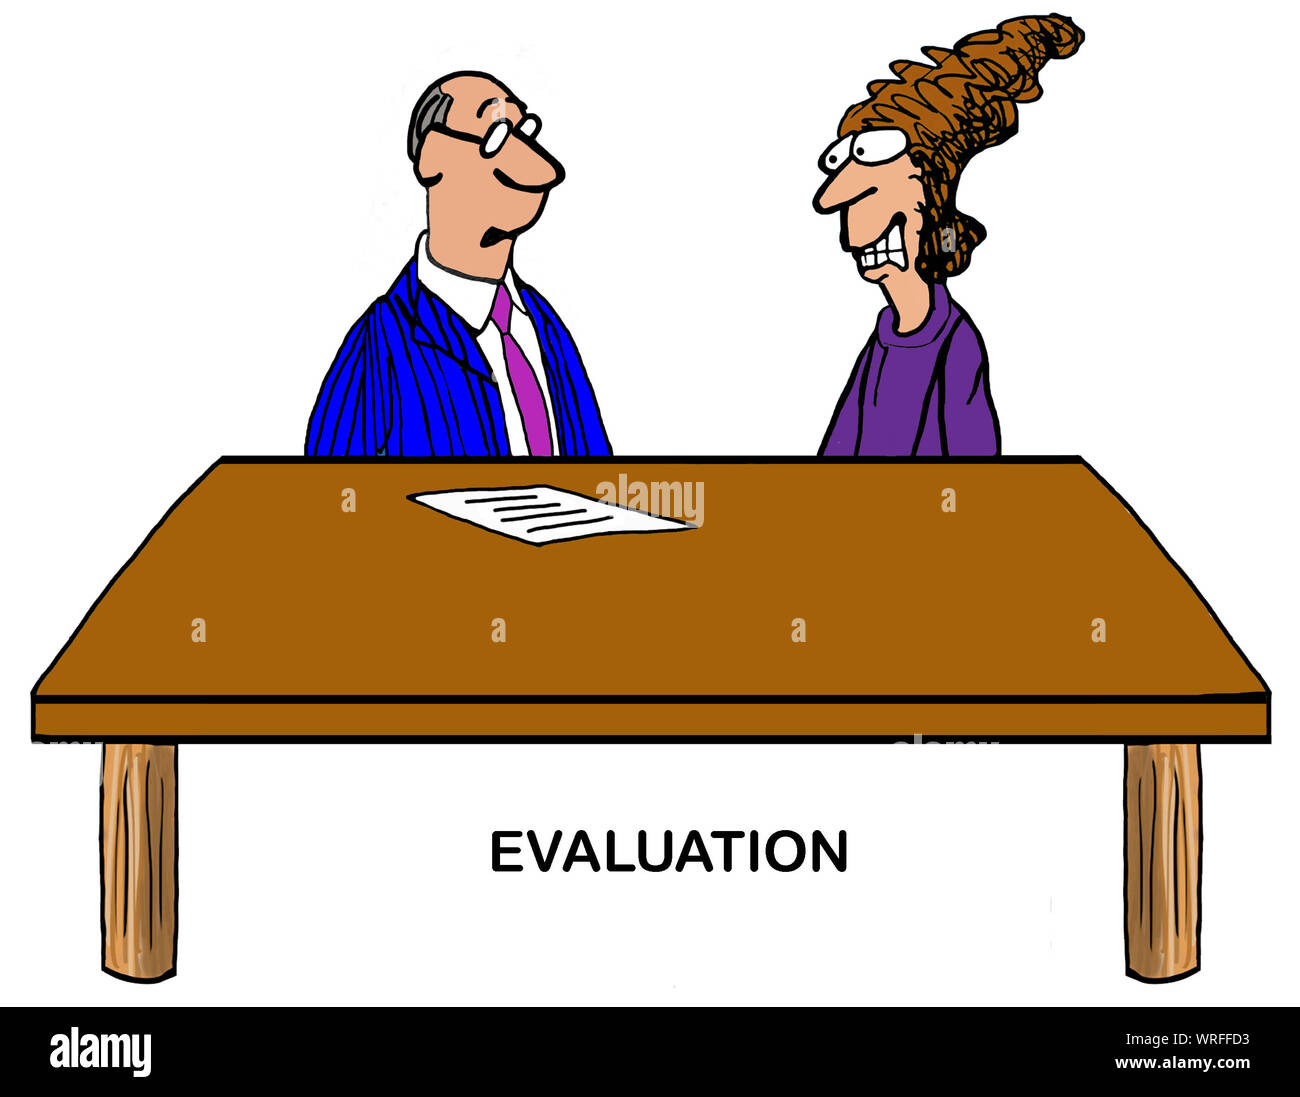 The woman is very nervous and stressed about her work evaluation. Stock Photo